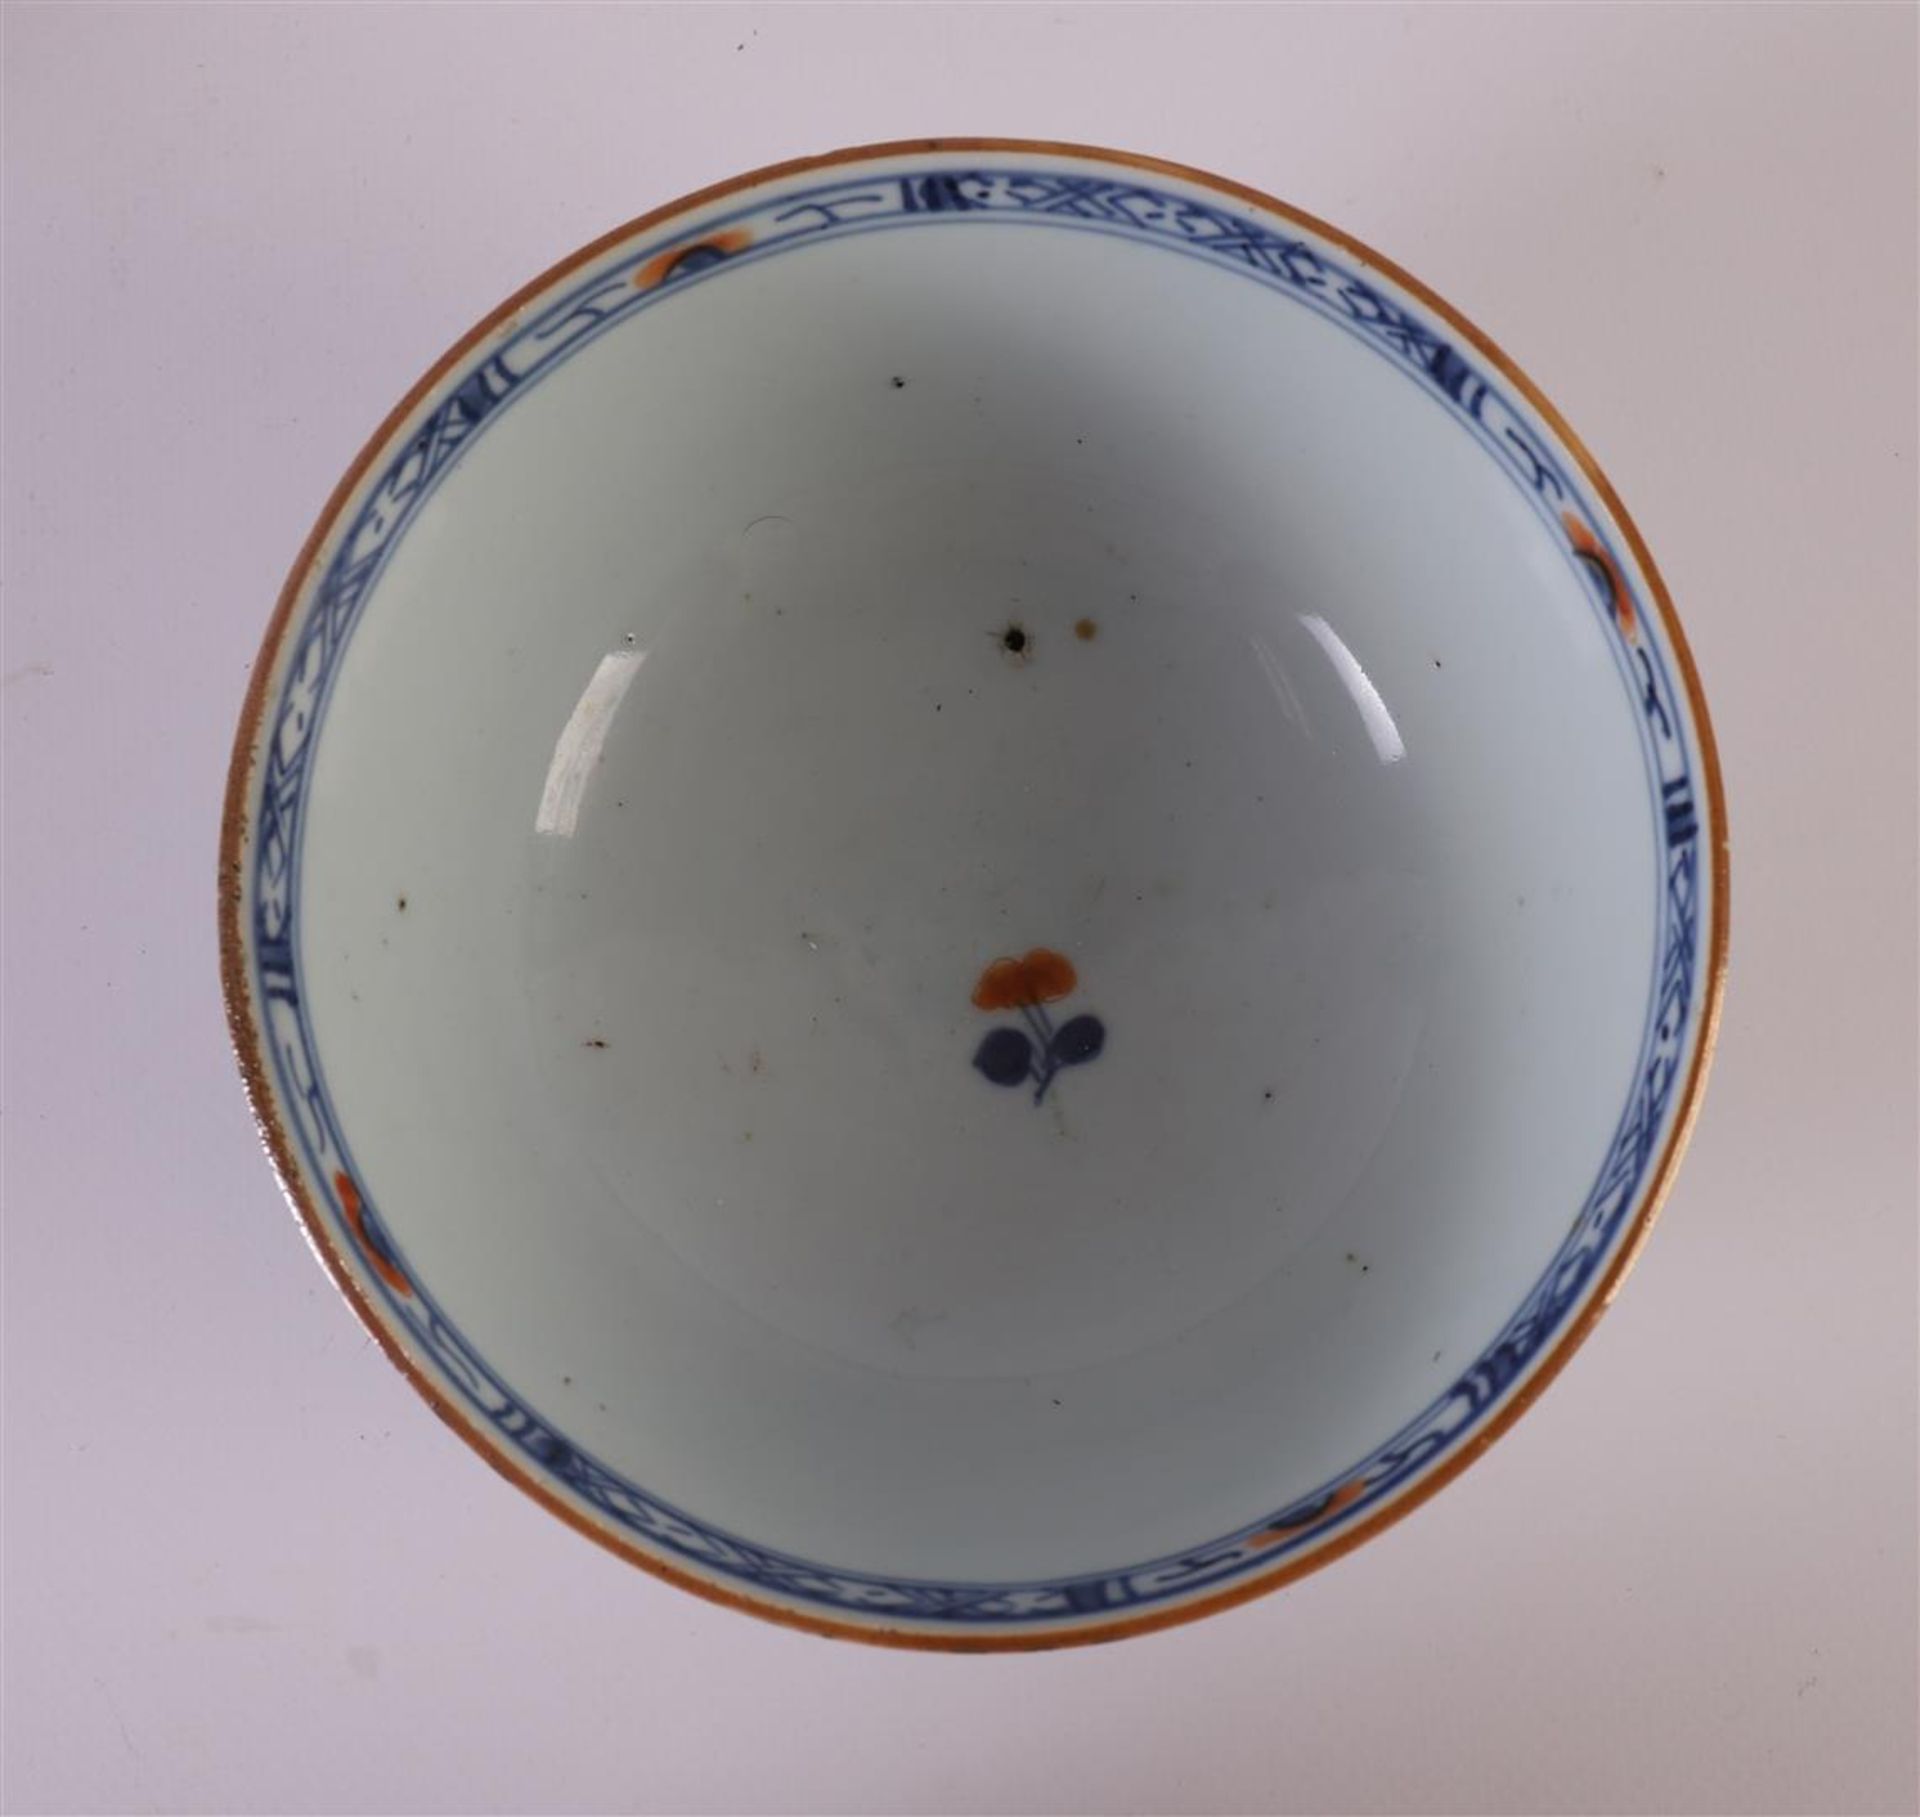 A set of porcelain Chinese Imari bowls on a stand, China, Qianlong, 18th century. Blue/red, partly - Image 6 of 10